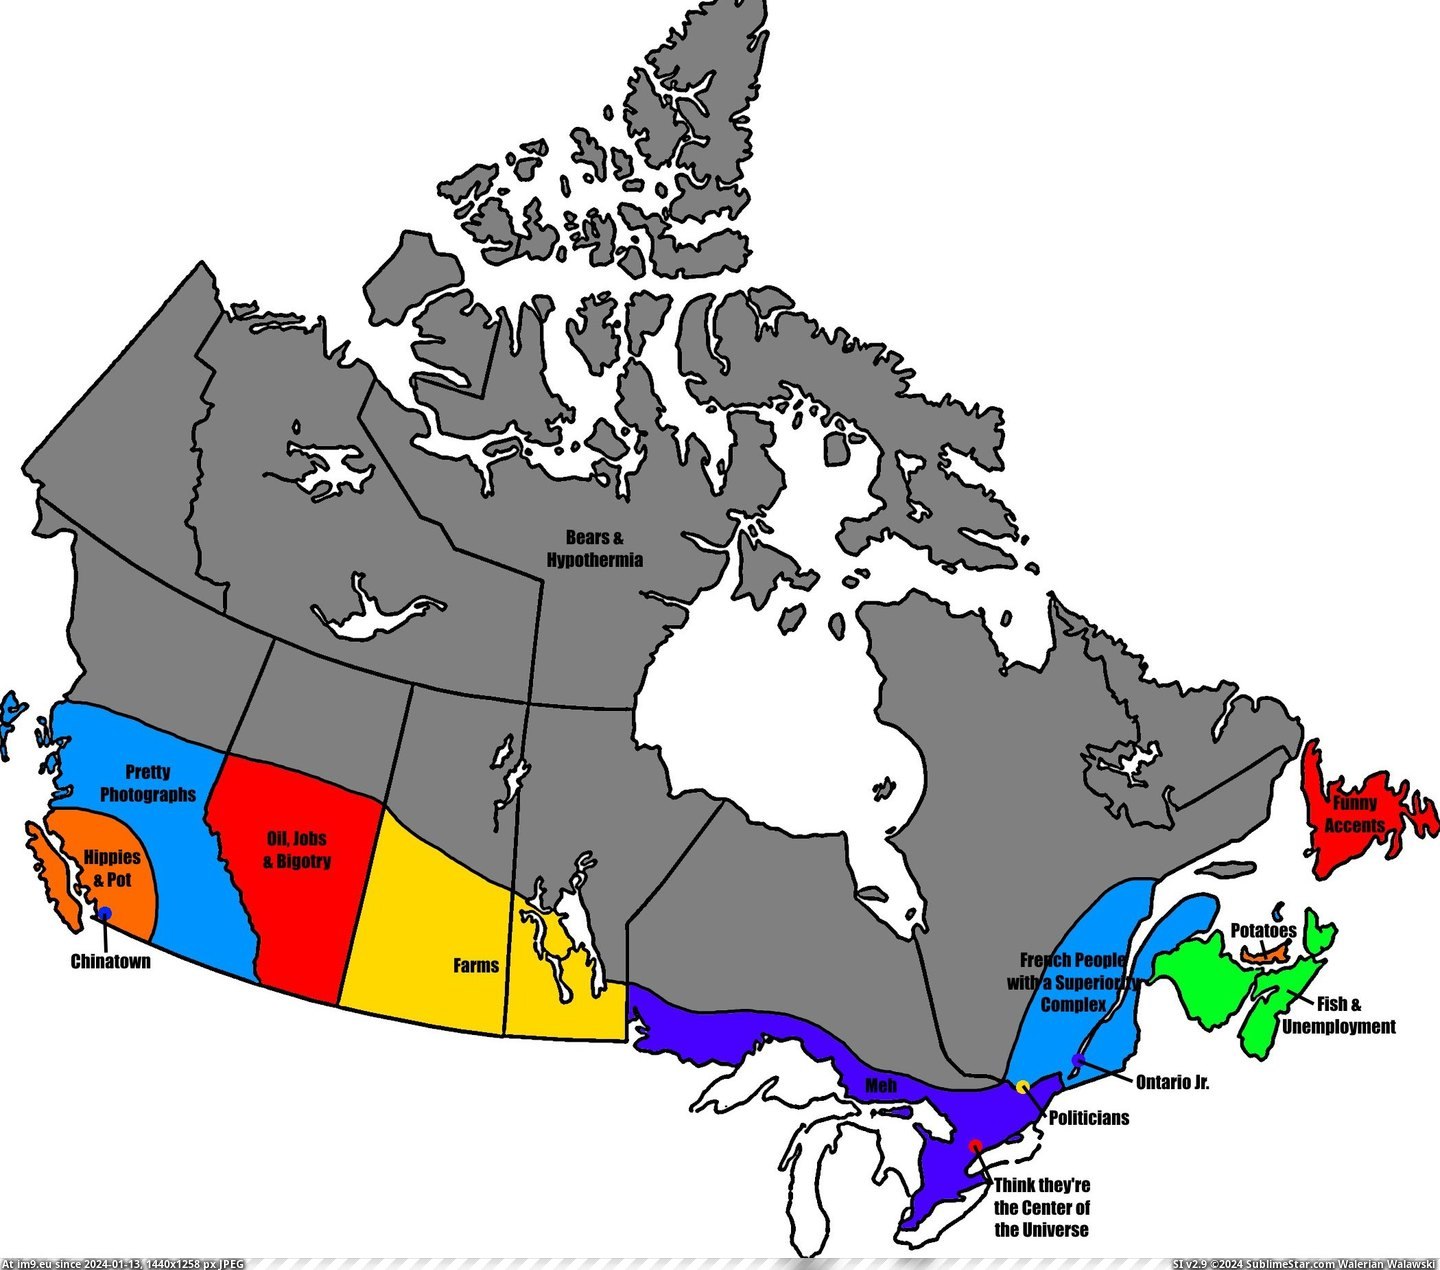 #Thought #Canada #France #Stereotypes #Stereotype #Popular #Maps #Nova [Mapporn]  Since the UK and France stereotype maps were so popular I thought I'd do my home. Stereotypes of Canada from a Nova S Pic. (Image of album My r/MAPS favs))